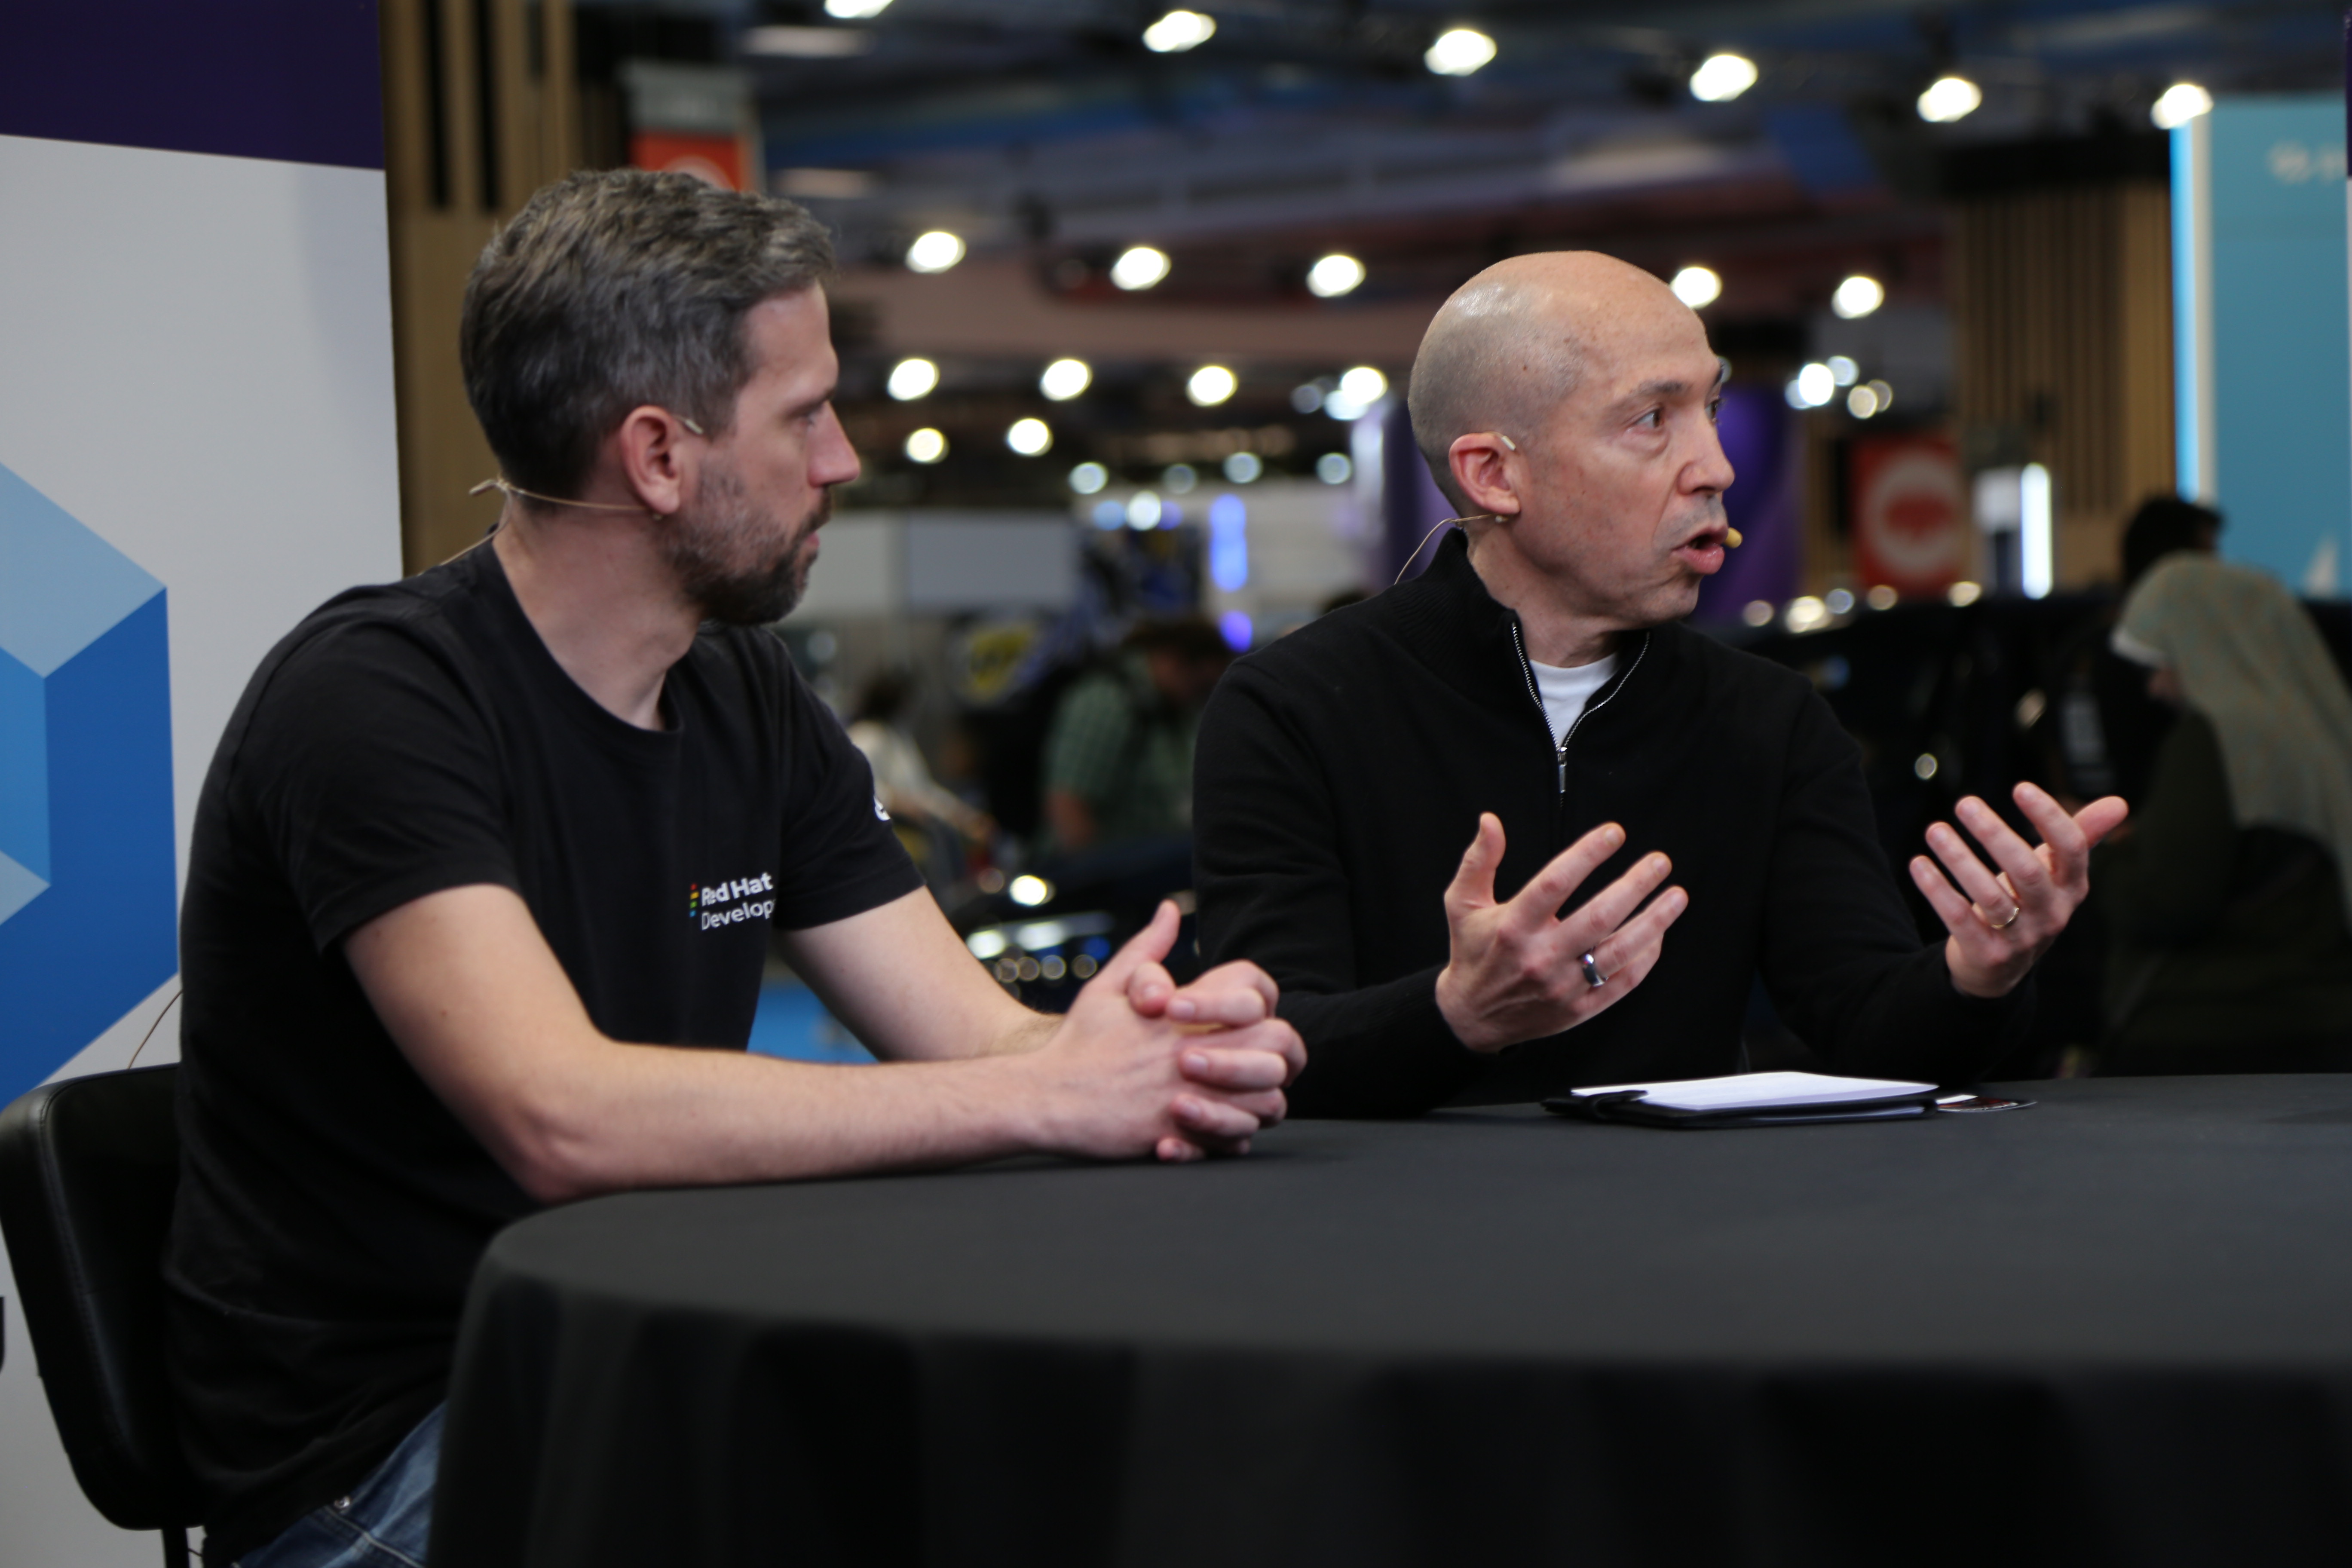 Ignacio Riesgo, senior director of developer marketing and strategy at Red Hat Inc., and Kevin Dubois (left), principal developer advocate at Red Hat, talks with theCUBE during KubeCON EU about the importance of tackling the cognitive load headache that developers face since it hinders productivity